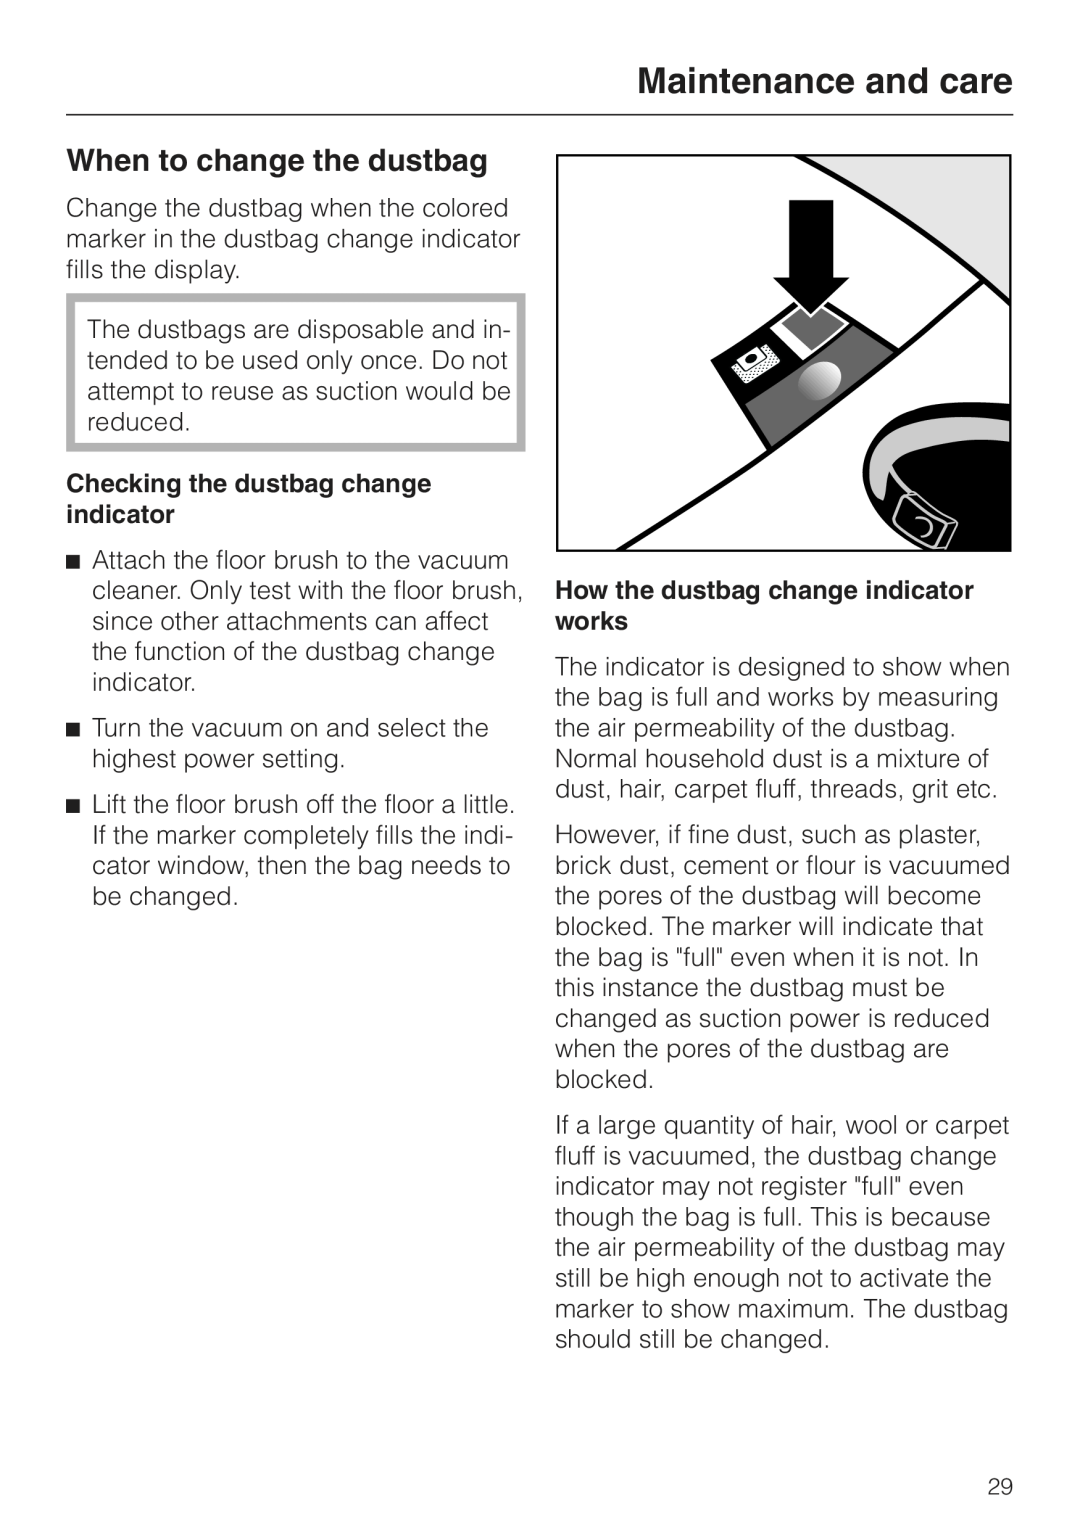 Miele S 600 - S 648, S 500 - S 548 When to change the dustbag, Maintenance and care, Checking the dustbag change indicator 